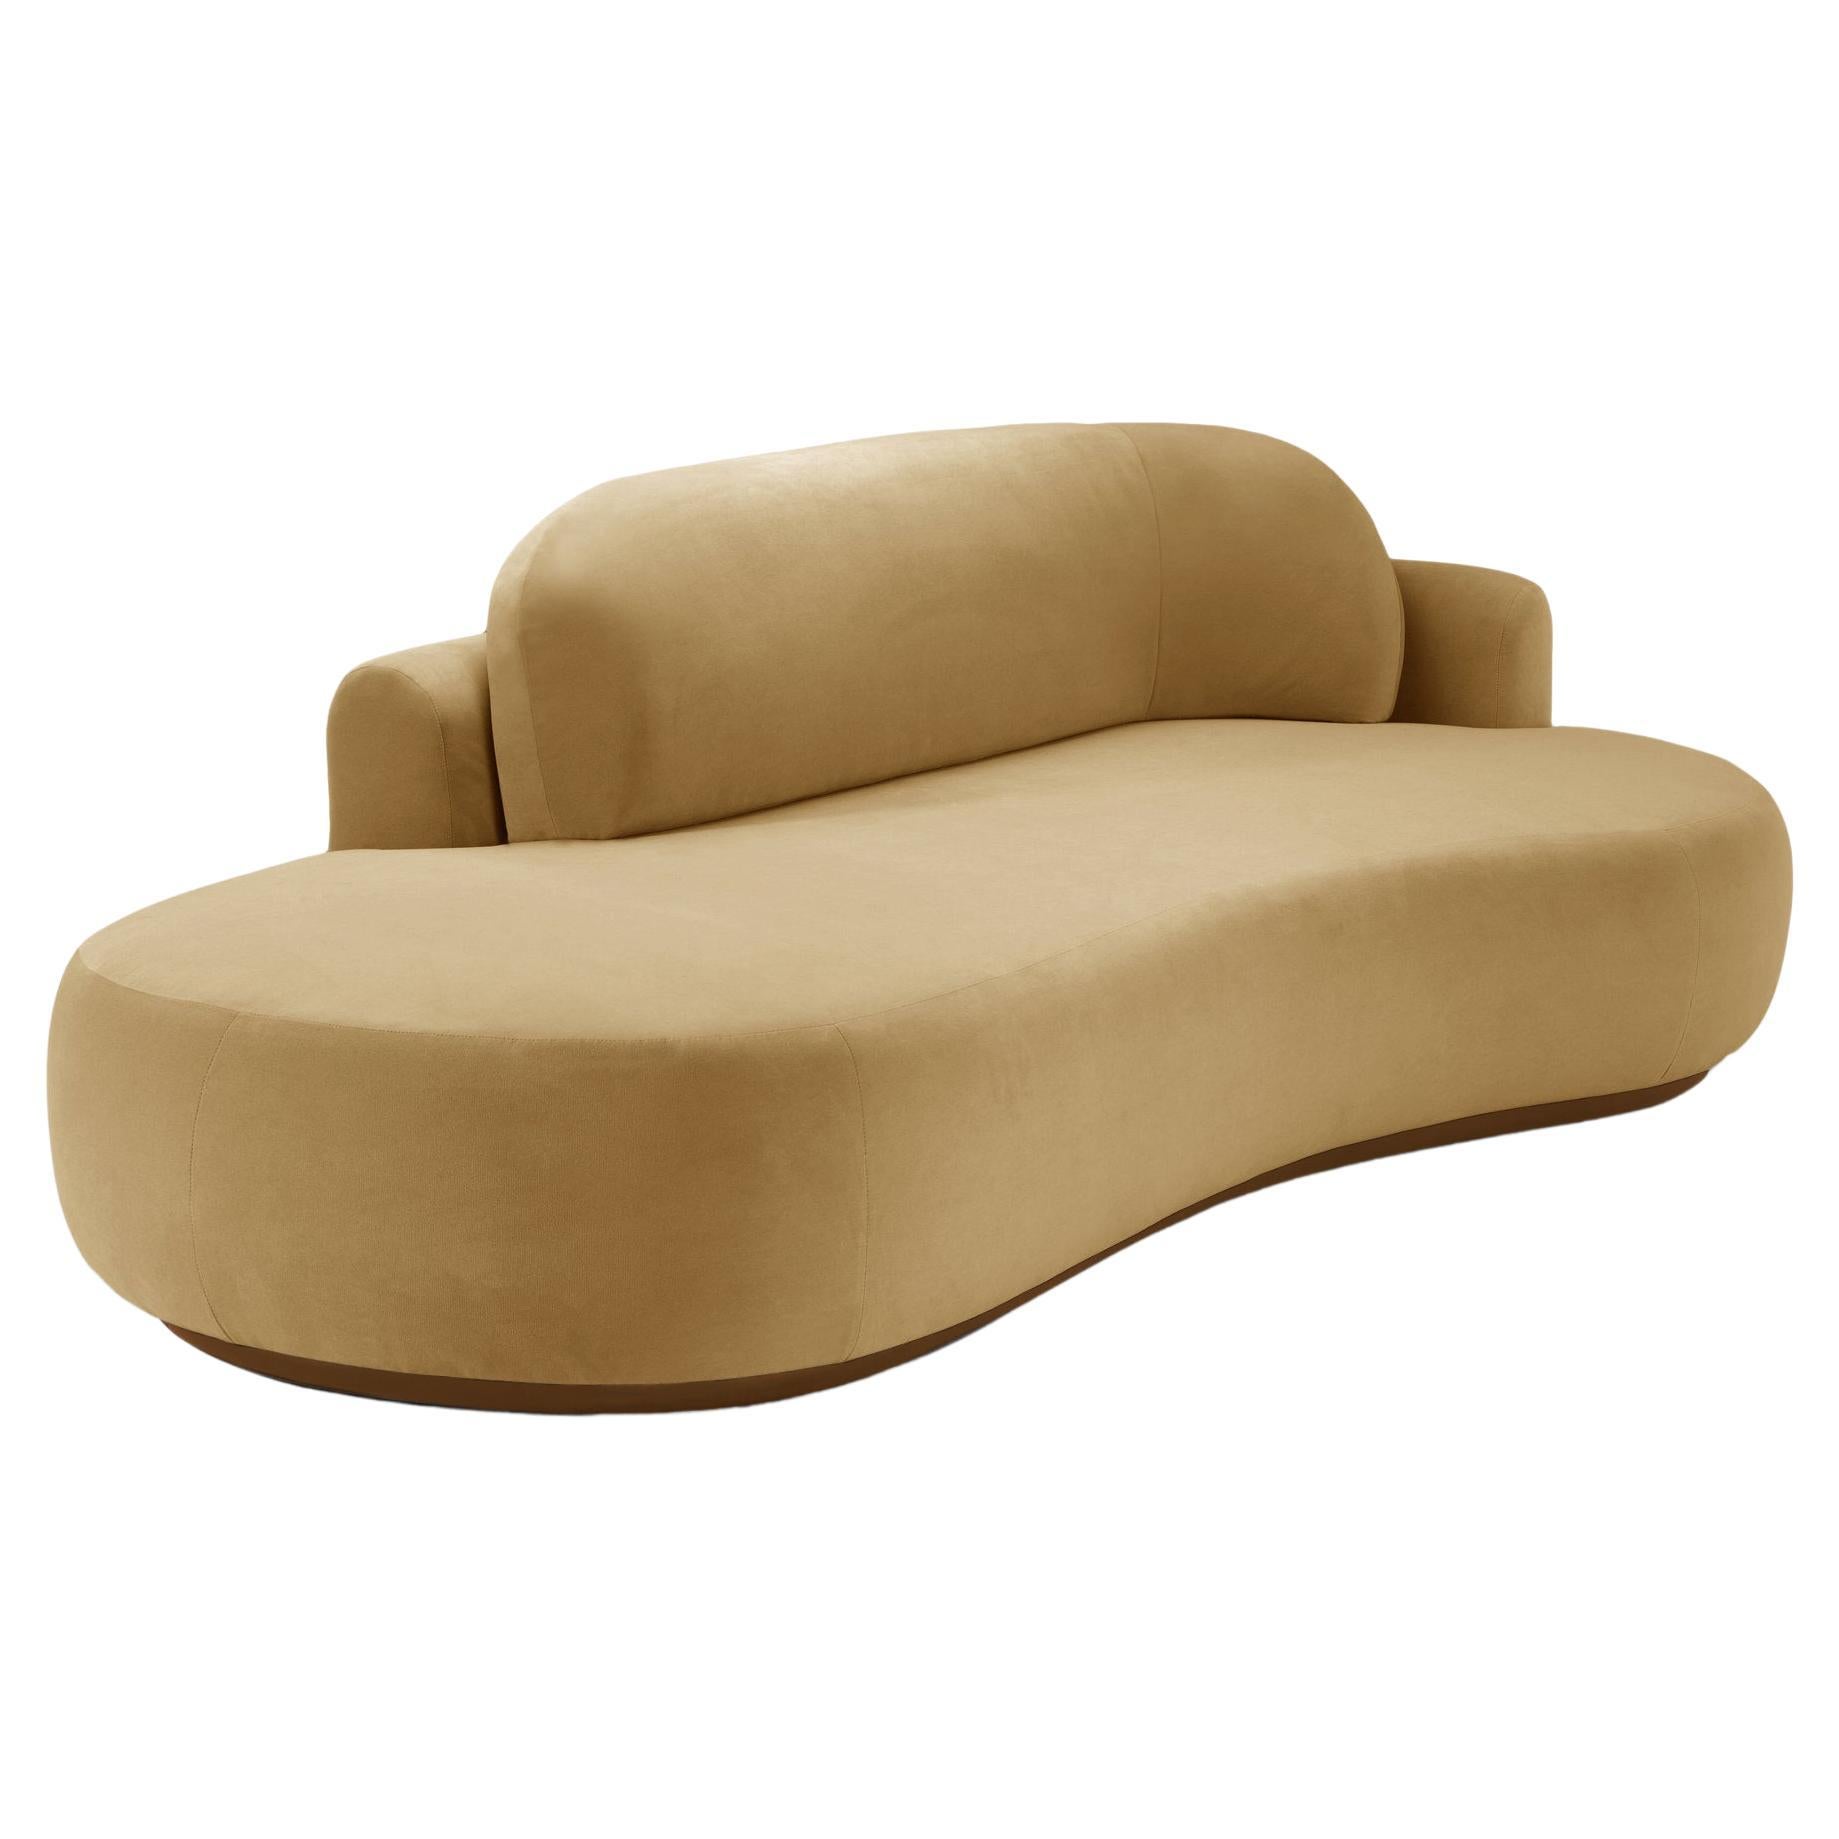 Naked Curved Sofa Single with Beech Ash-056-1 and Vigo Plantain For Sale